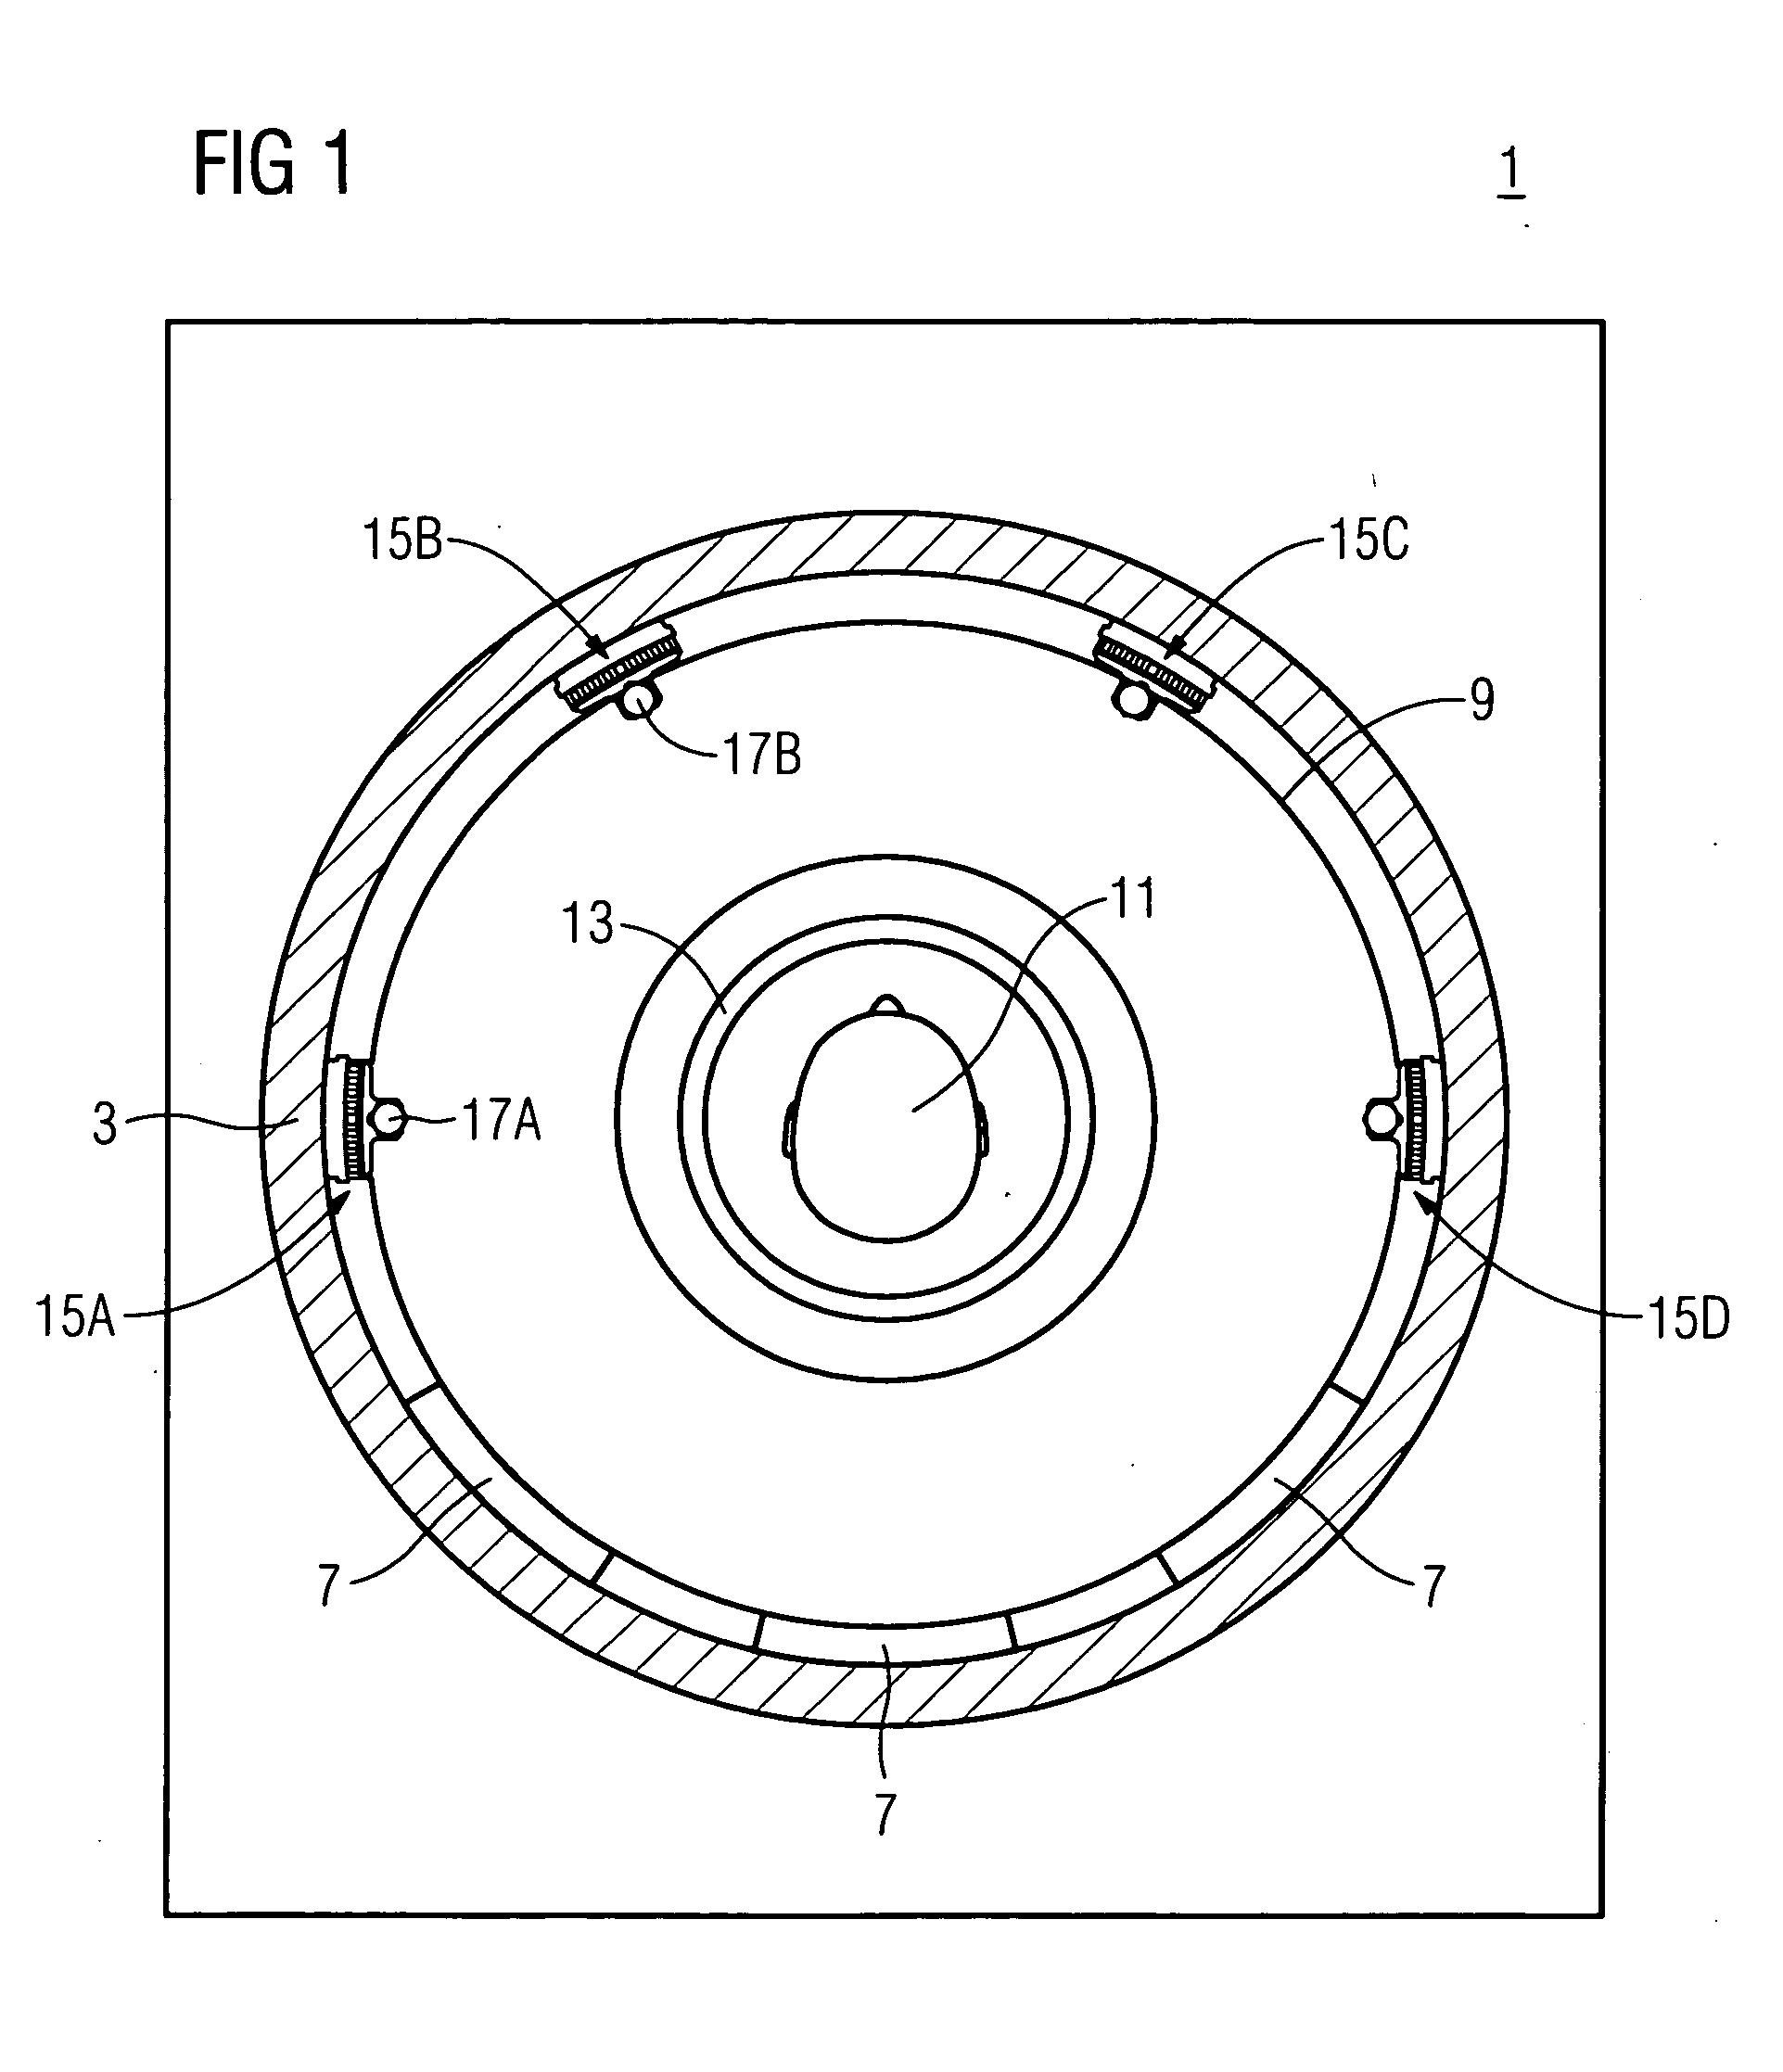 Magnetic resonance device with attachment means for attaching a gradient coil, attachment means